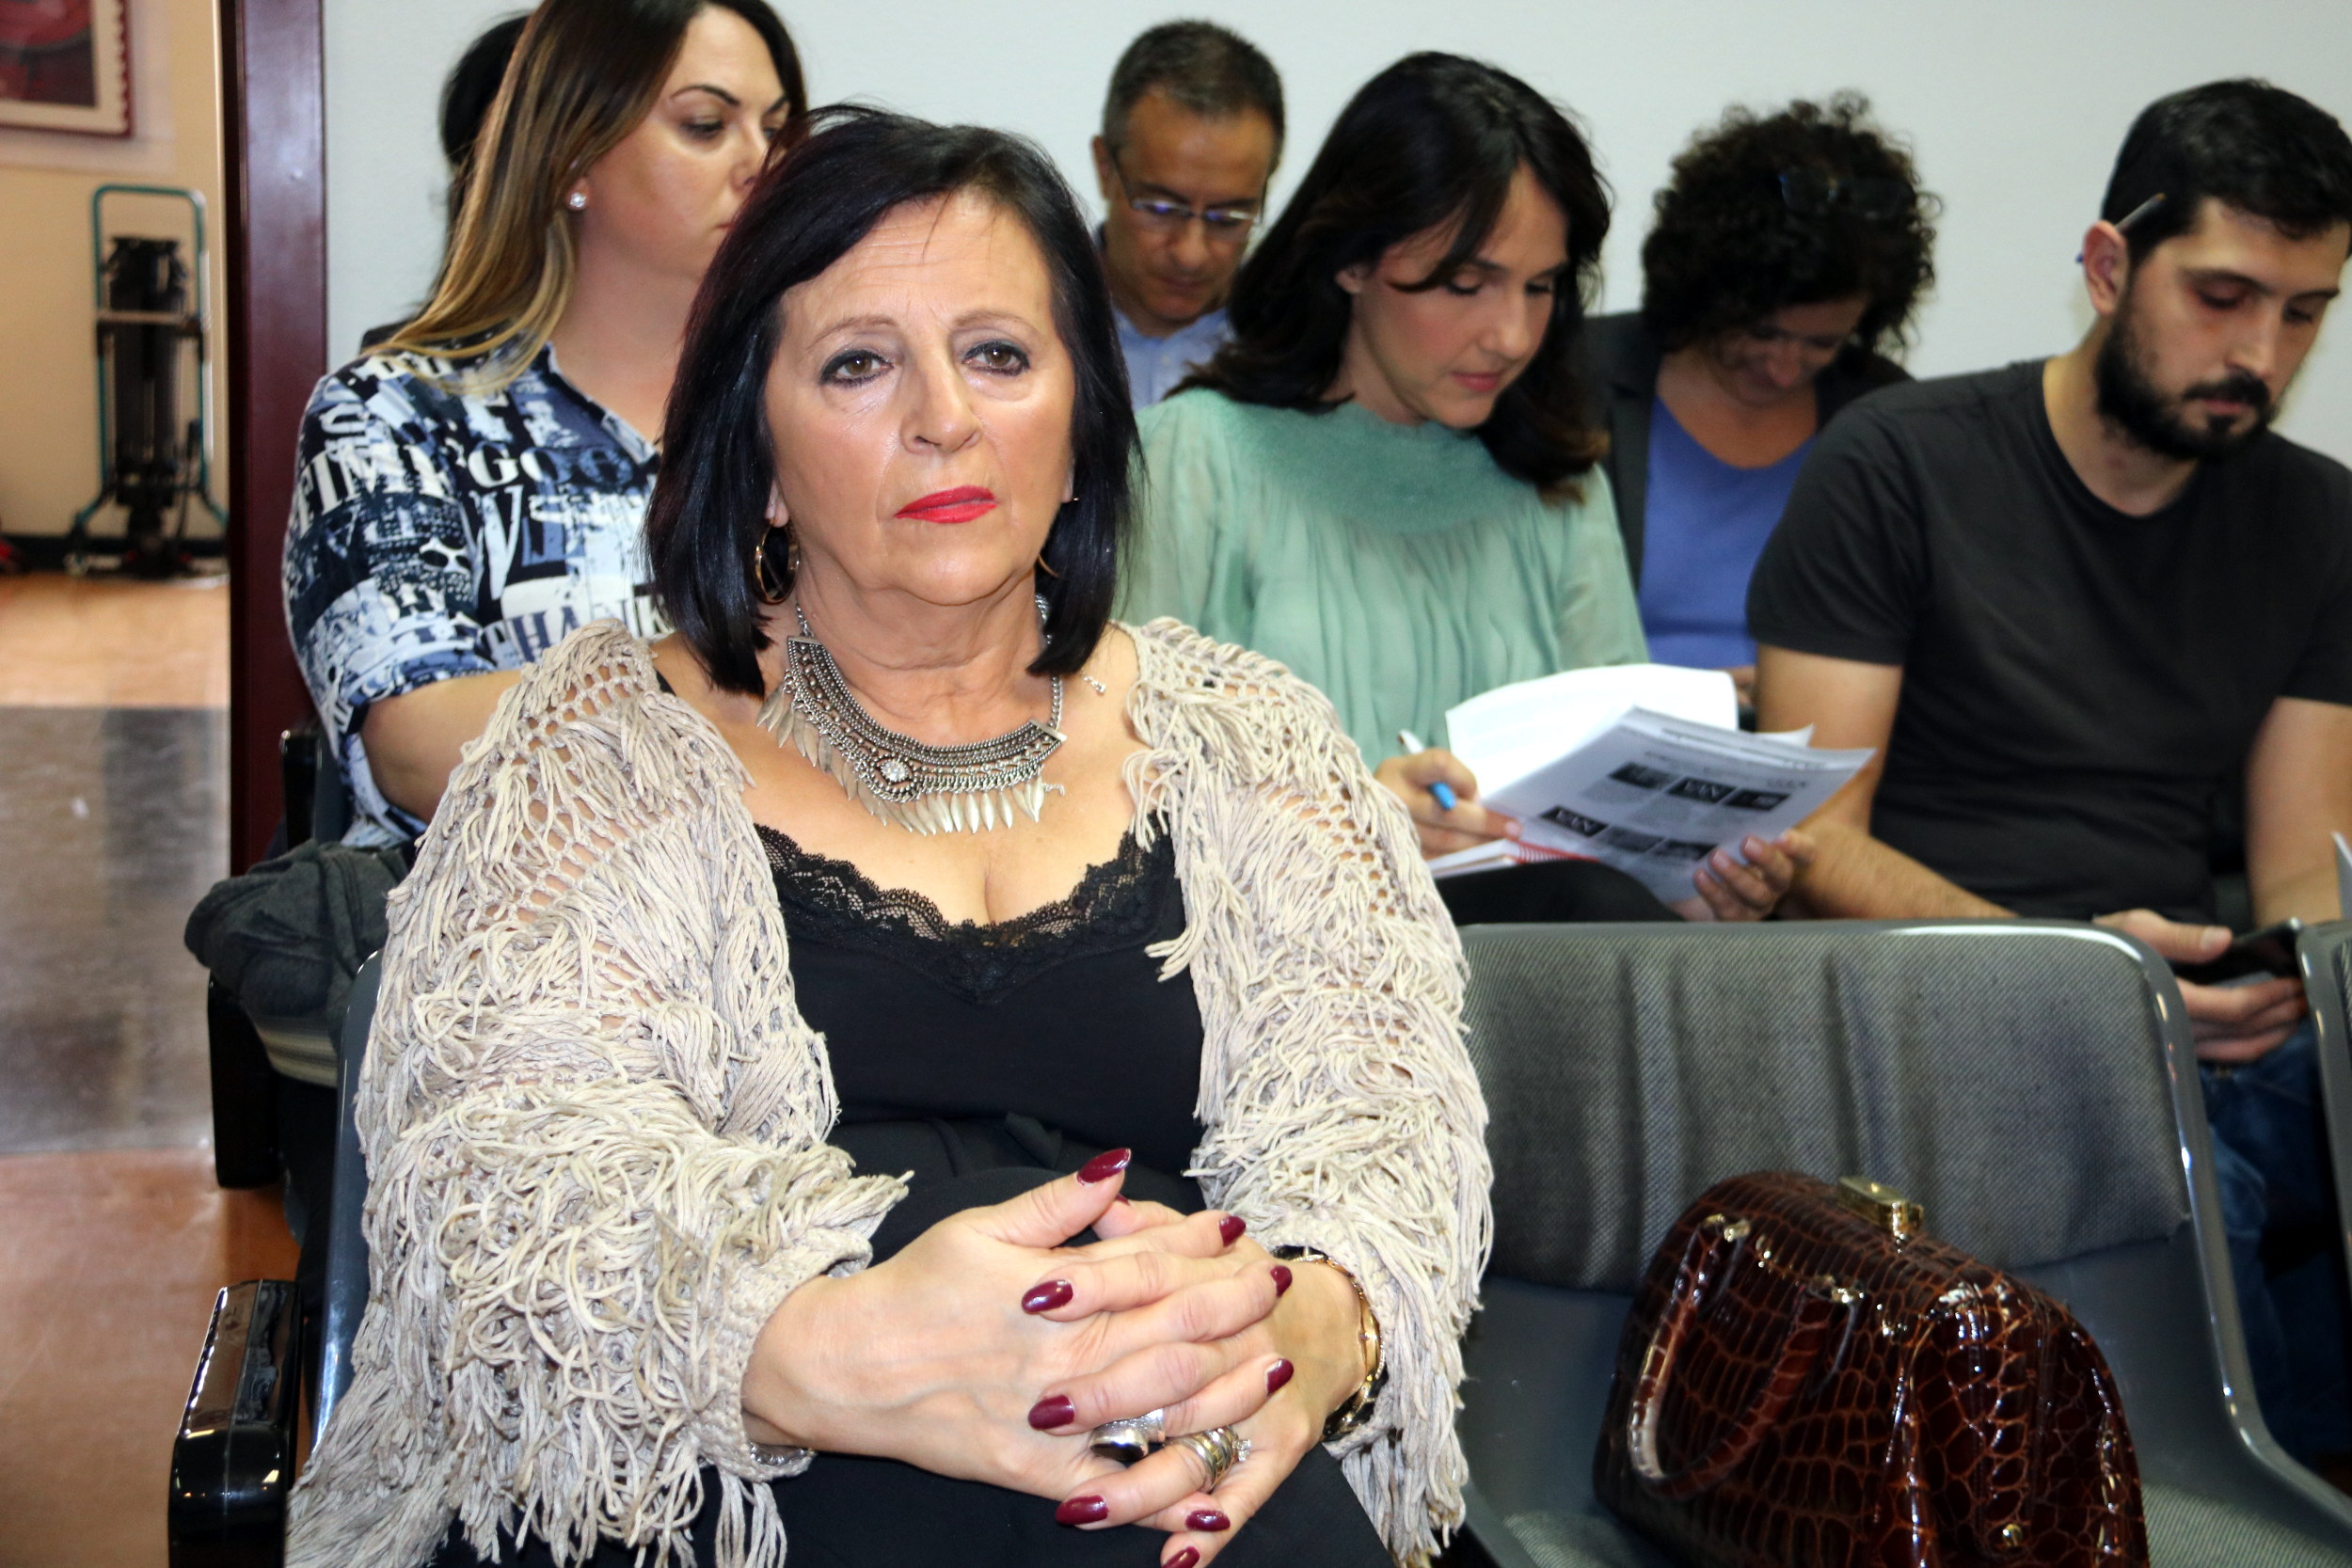 Pilar Abel in the Madrid courthouse waiting room (by ACN)